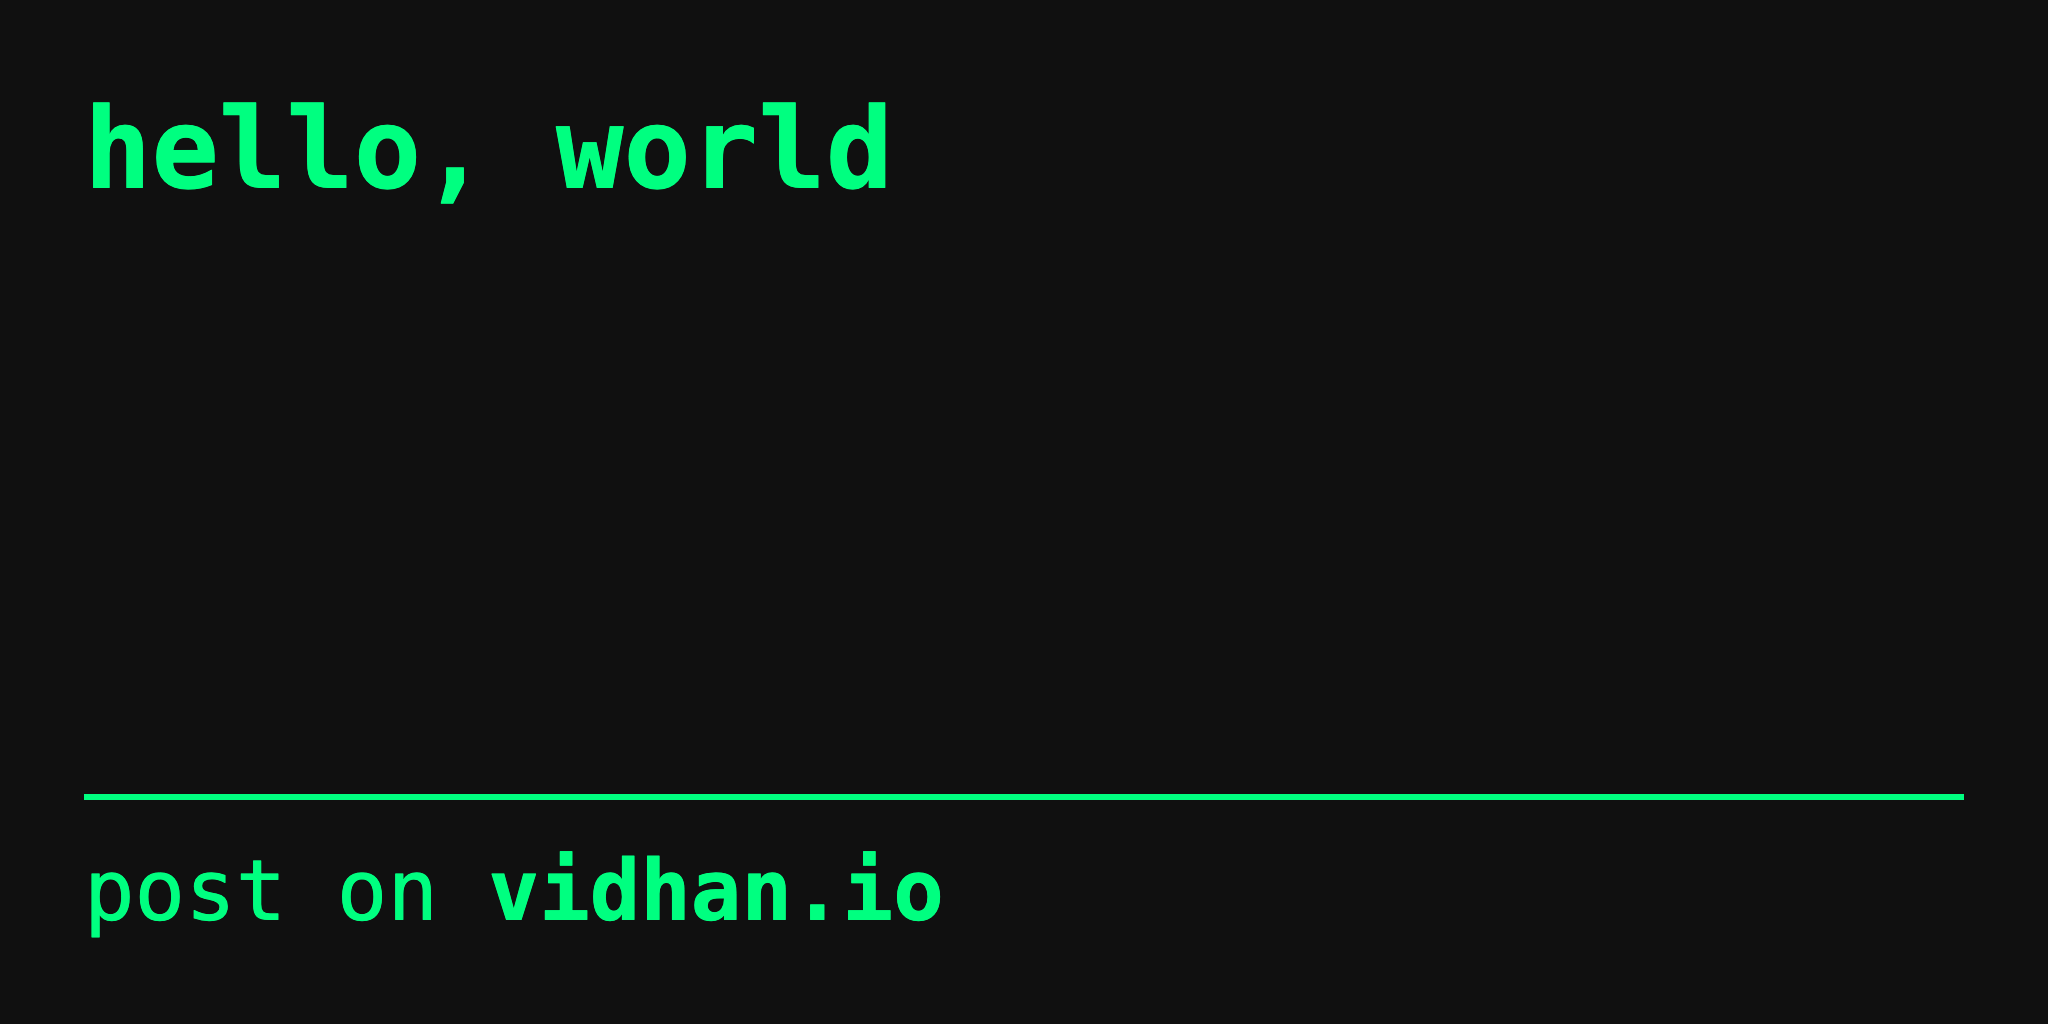 An Open Graph graphic with the text “hello world - post on vidhan.io”